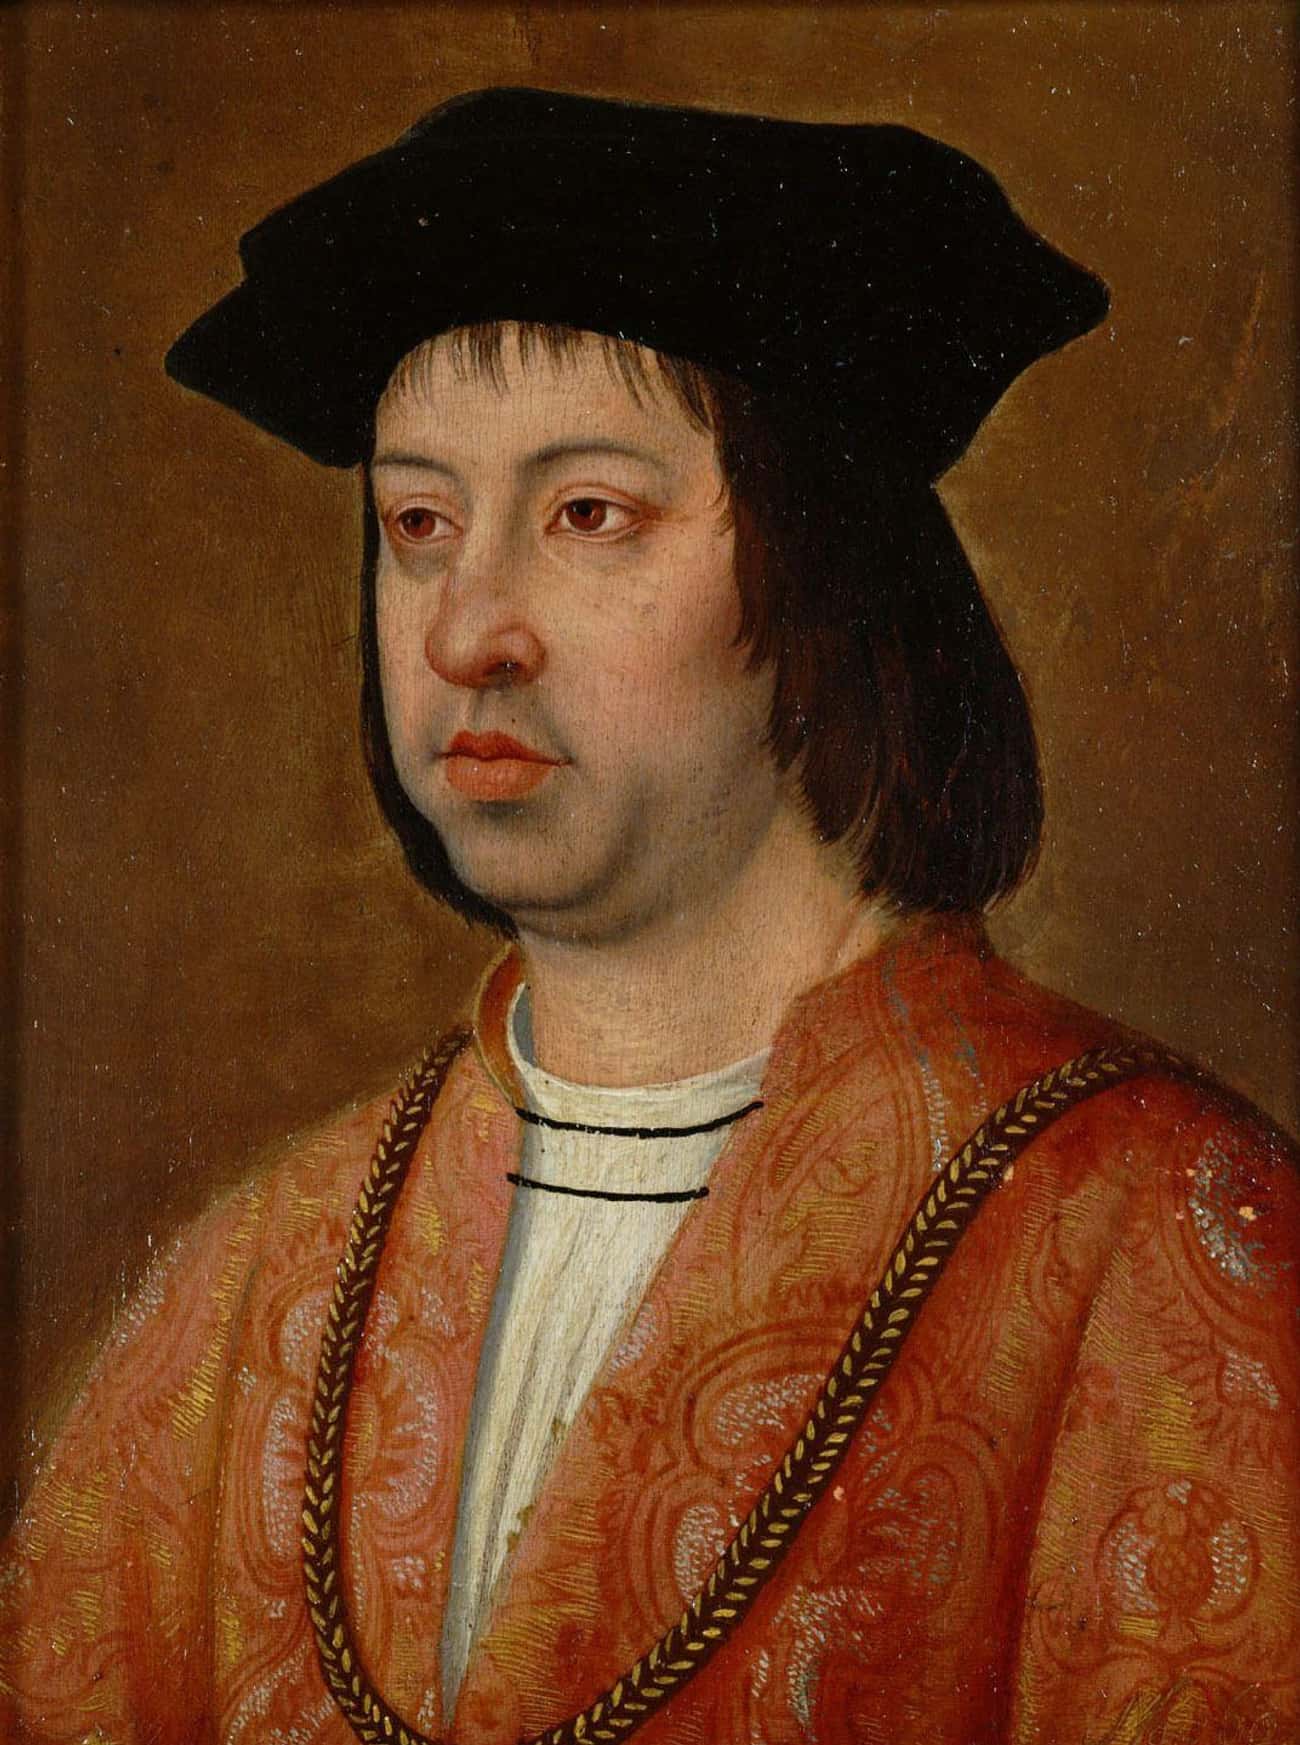 King Ferdinand II of Spain by Michel Sittow, 15th/16th Century